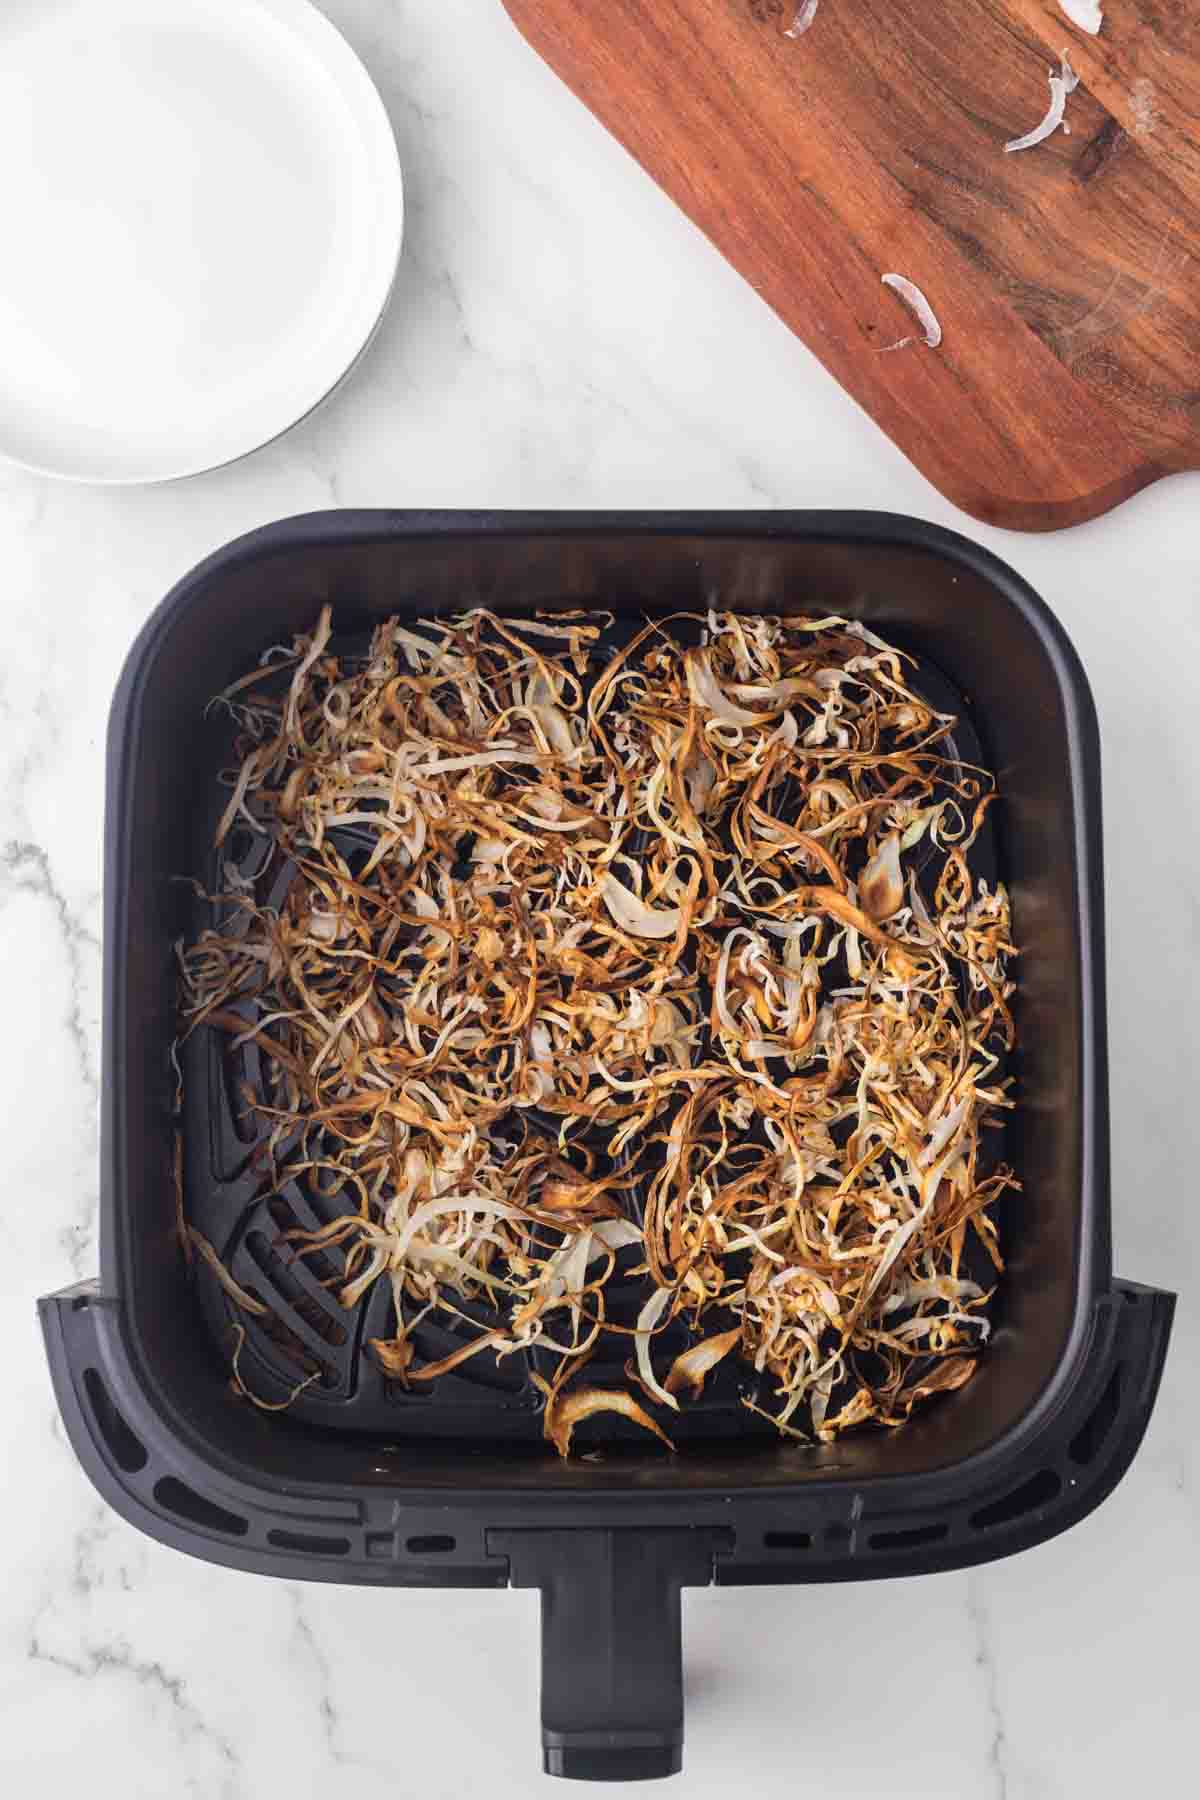 air fryer basked with fried onions